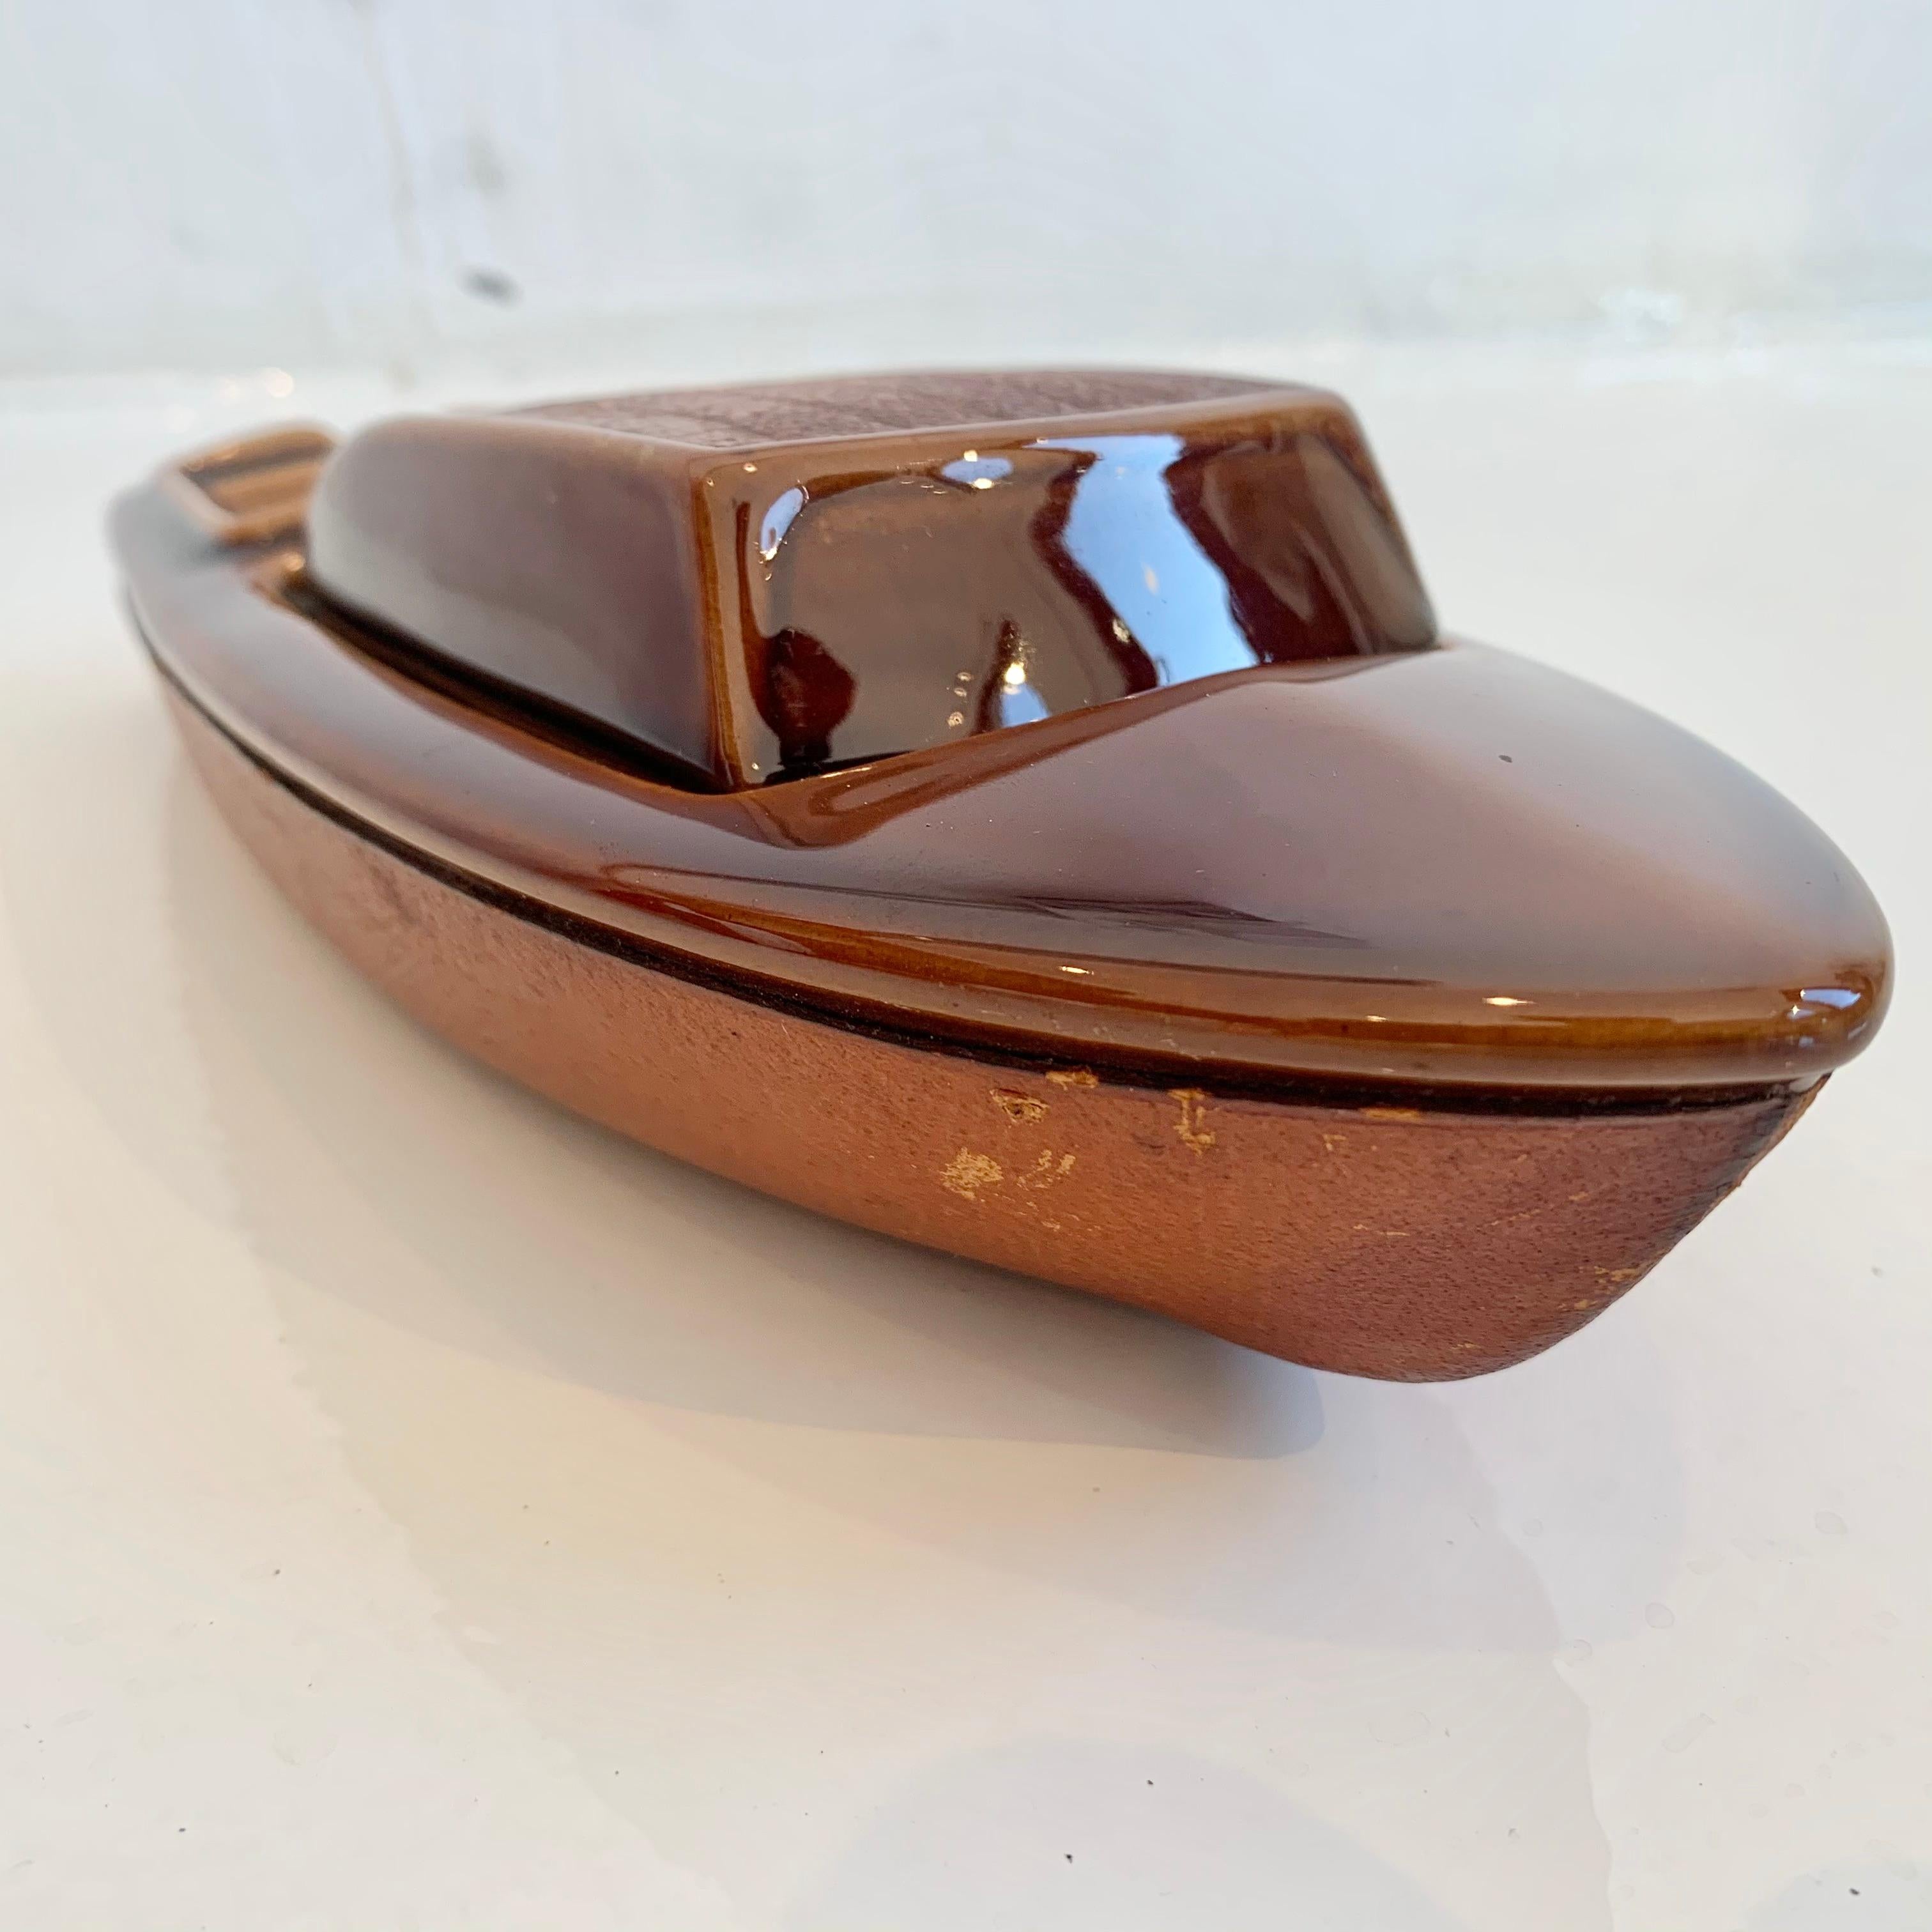 Interesting leather and ceramic boat, made in France. Leather bottom with ceramic interior. Top of boat comes off and reveals a stash box for cigarettes or joints. Ashtray in the back of the boat. Super cool object.